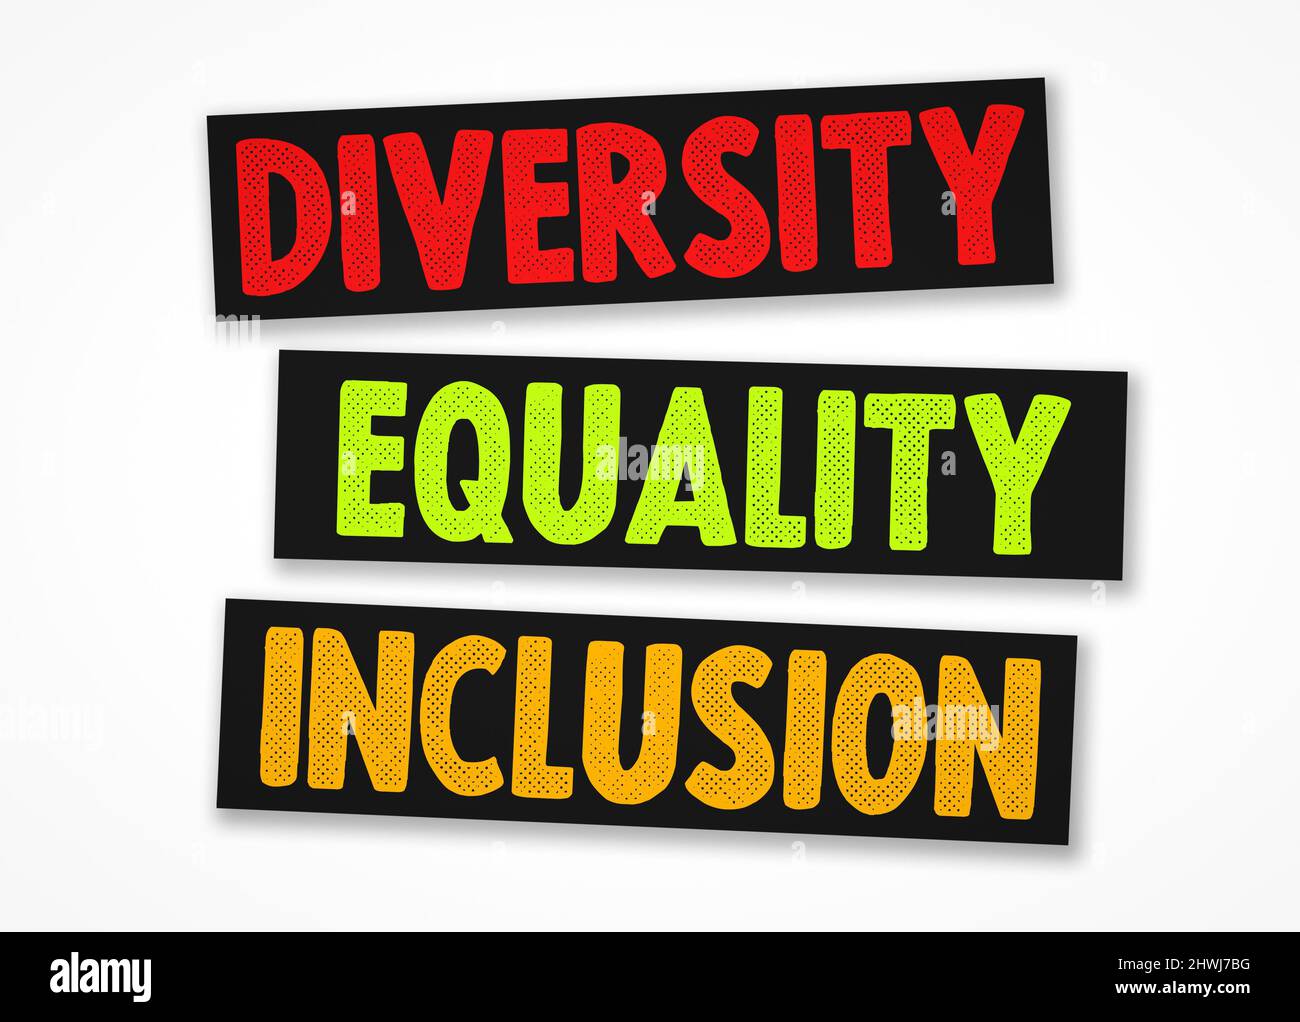 Diversity Equality and Inclusion Stock Photo